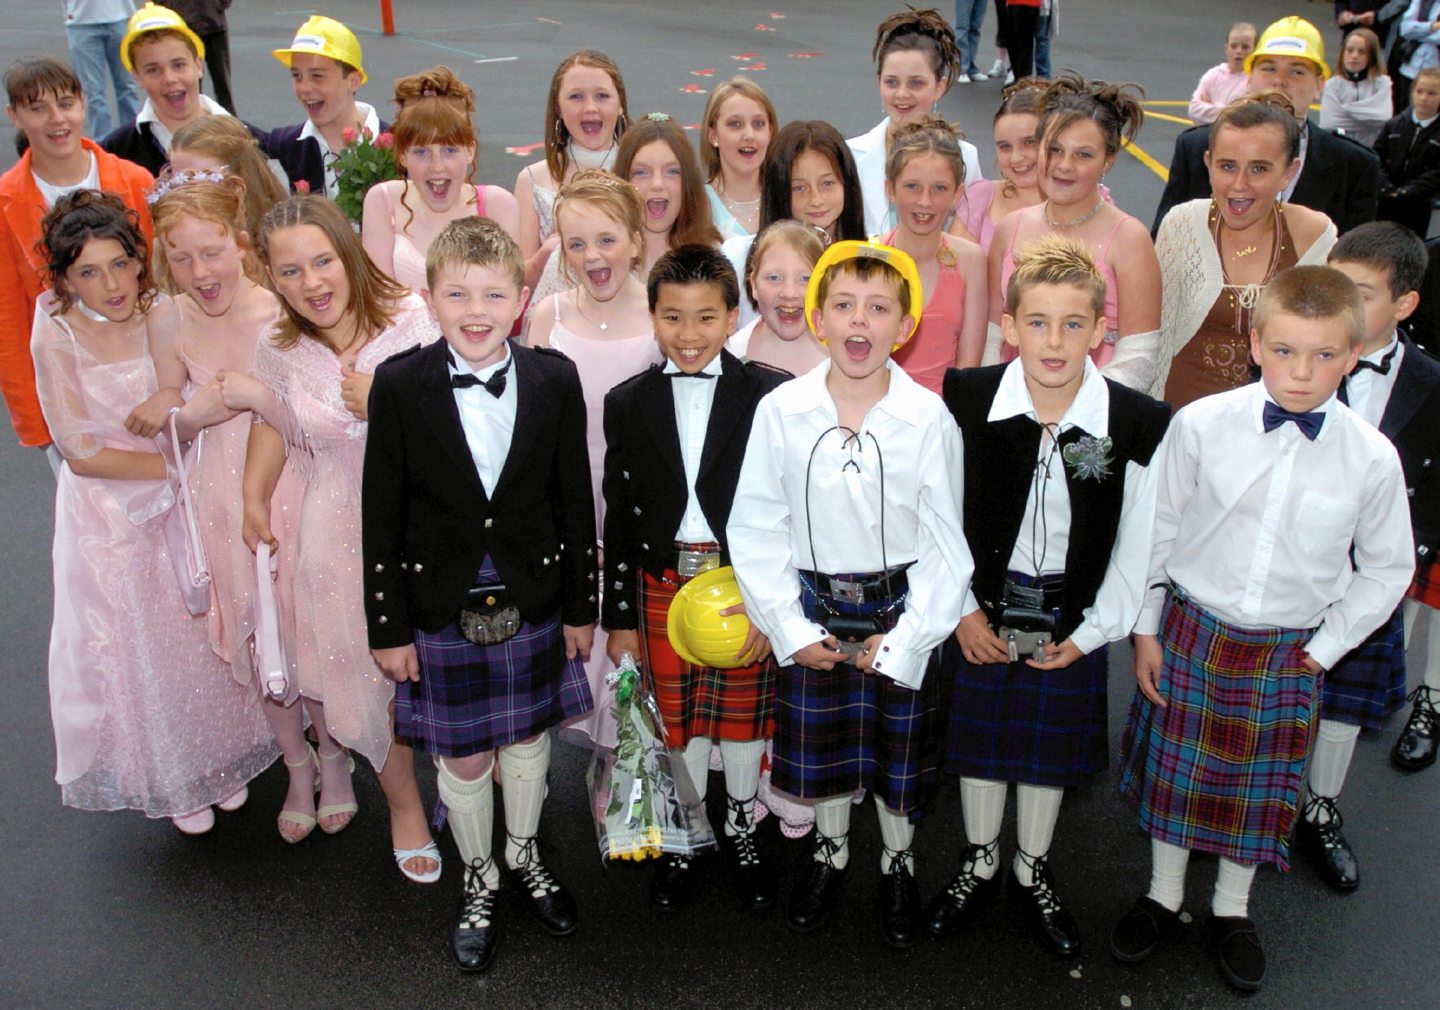 Walker Road youngsters dressed up for their end of year prom in 2005.